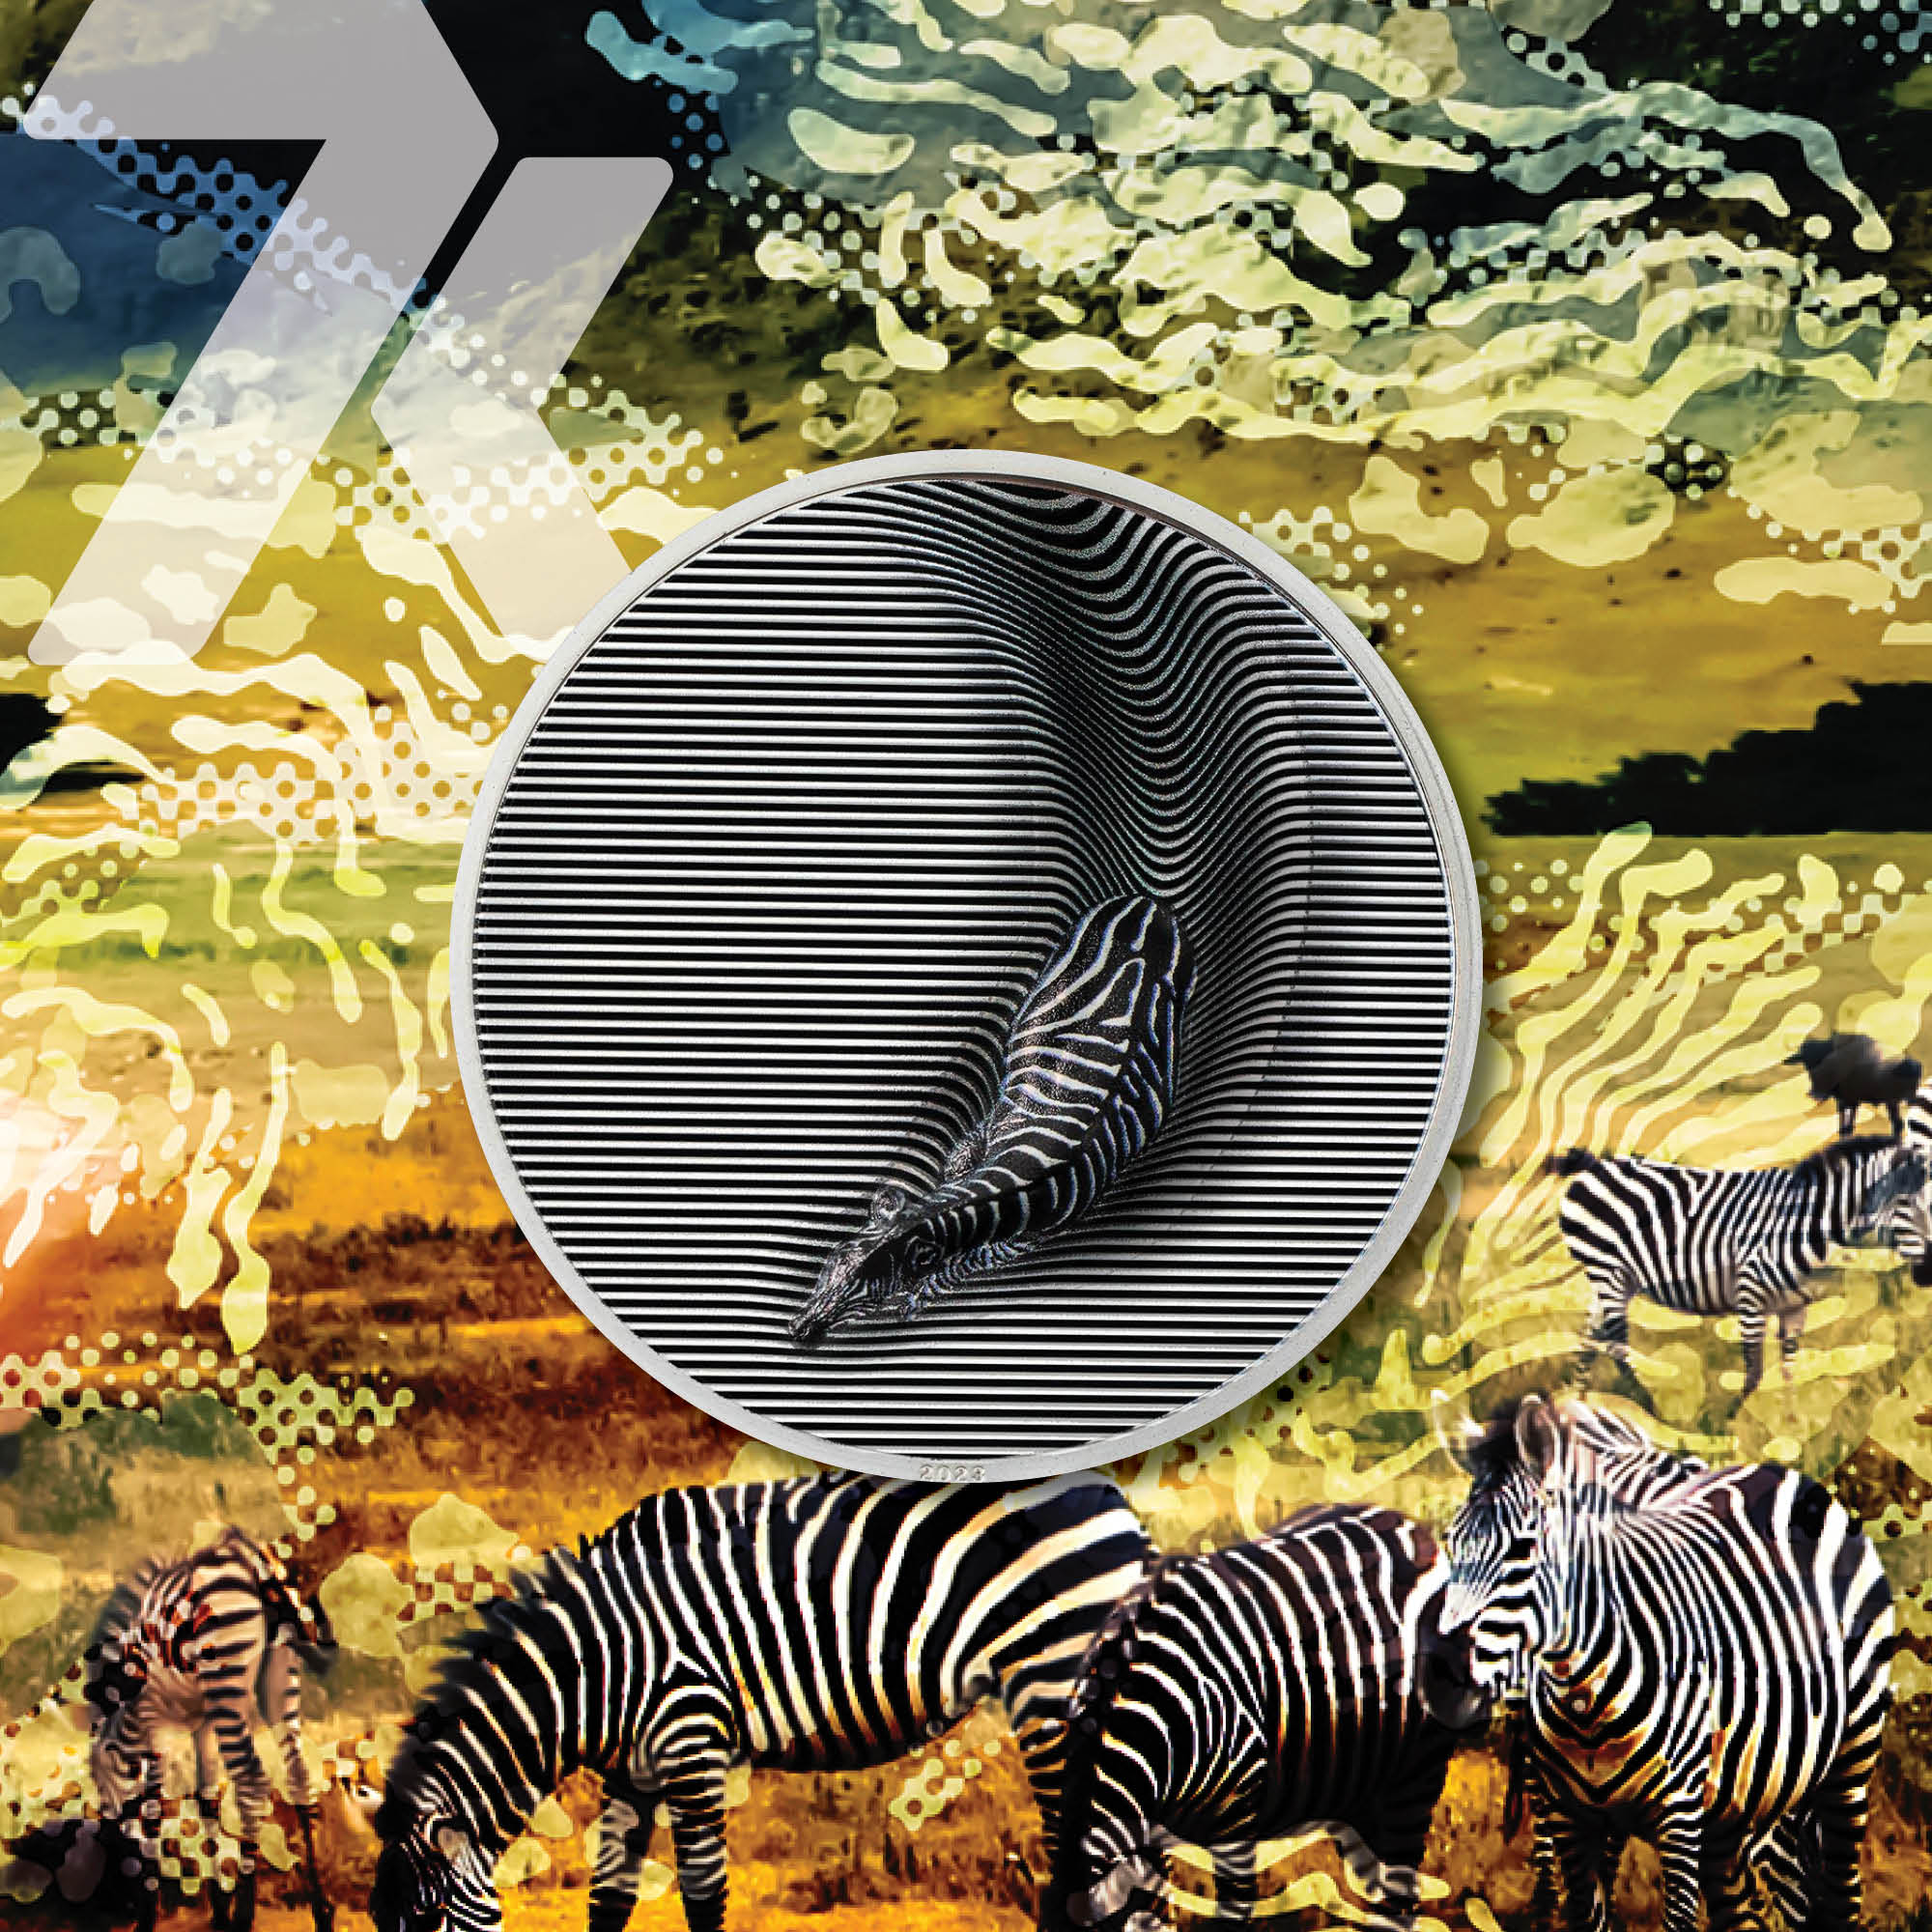 2023 Camouflage of Nature Zebra 3 oz Silver Coin